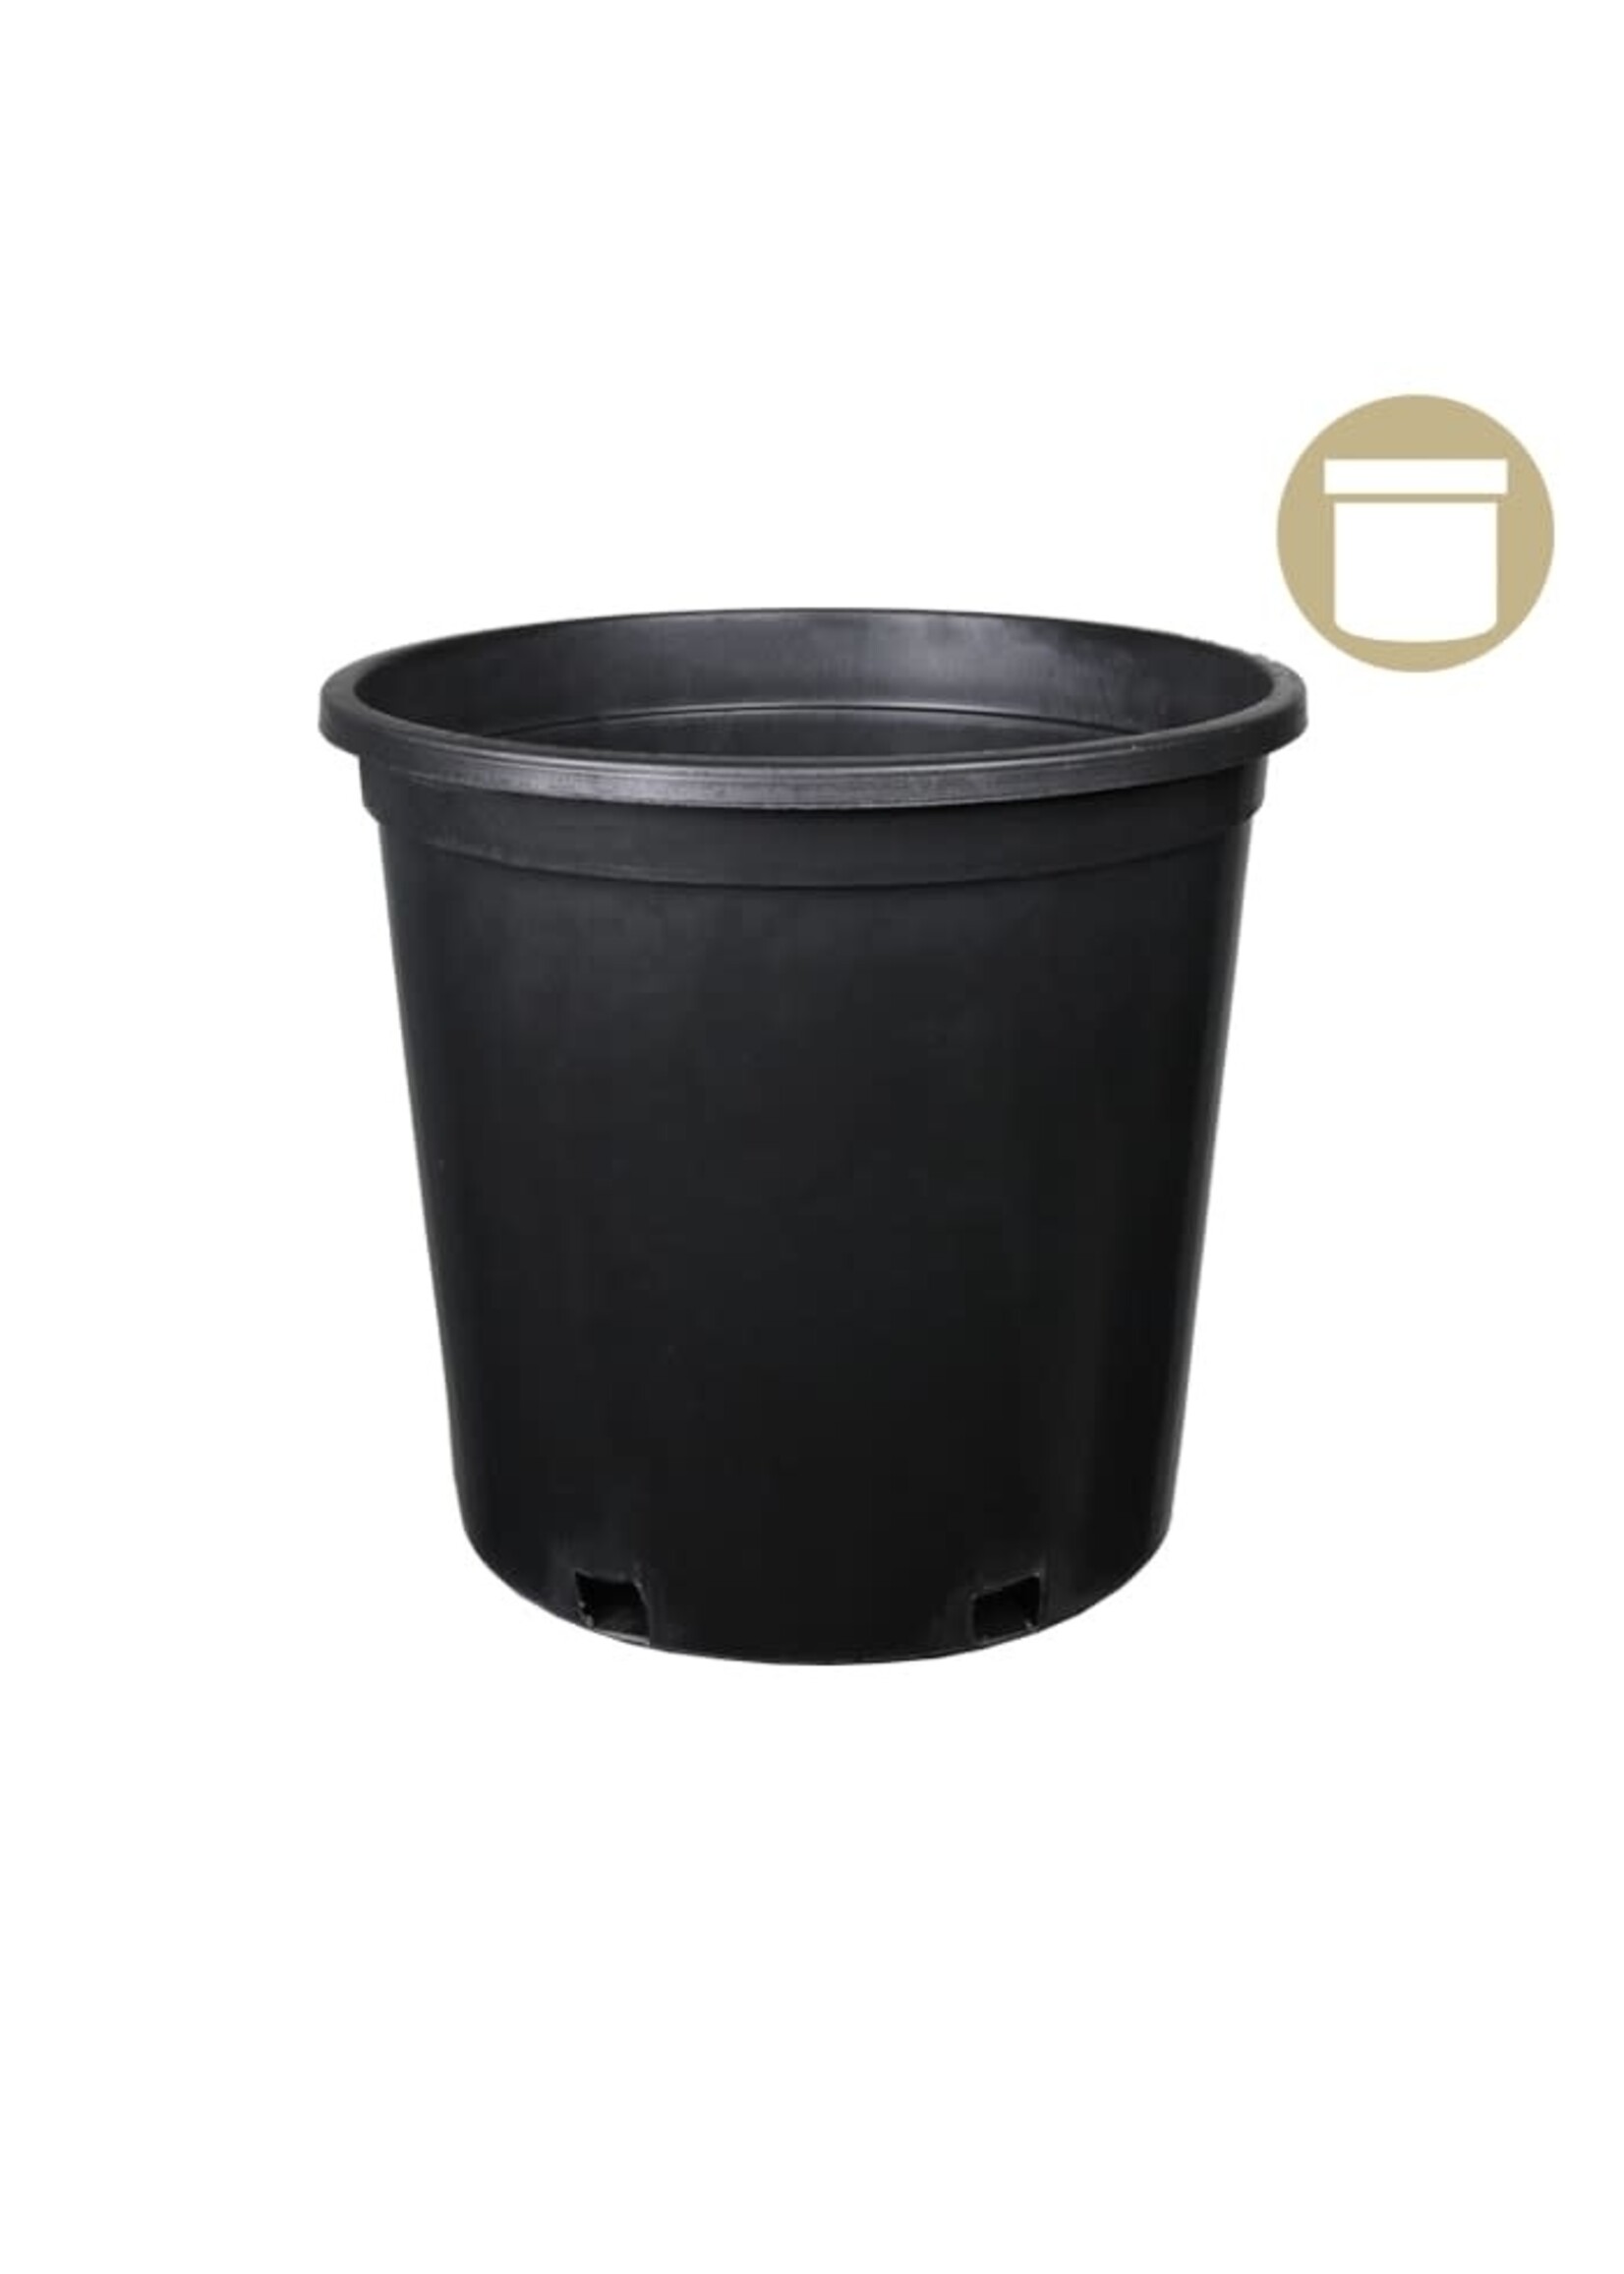 None 10 Gal. Injection Molded Pot